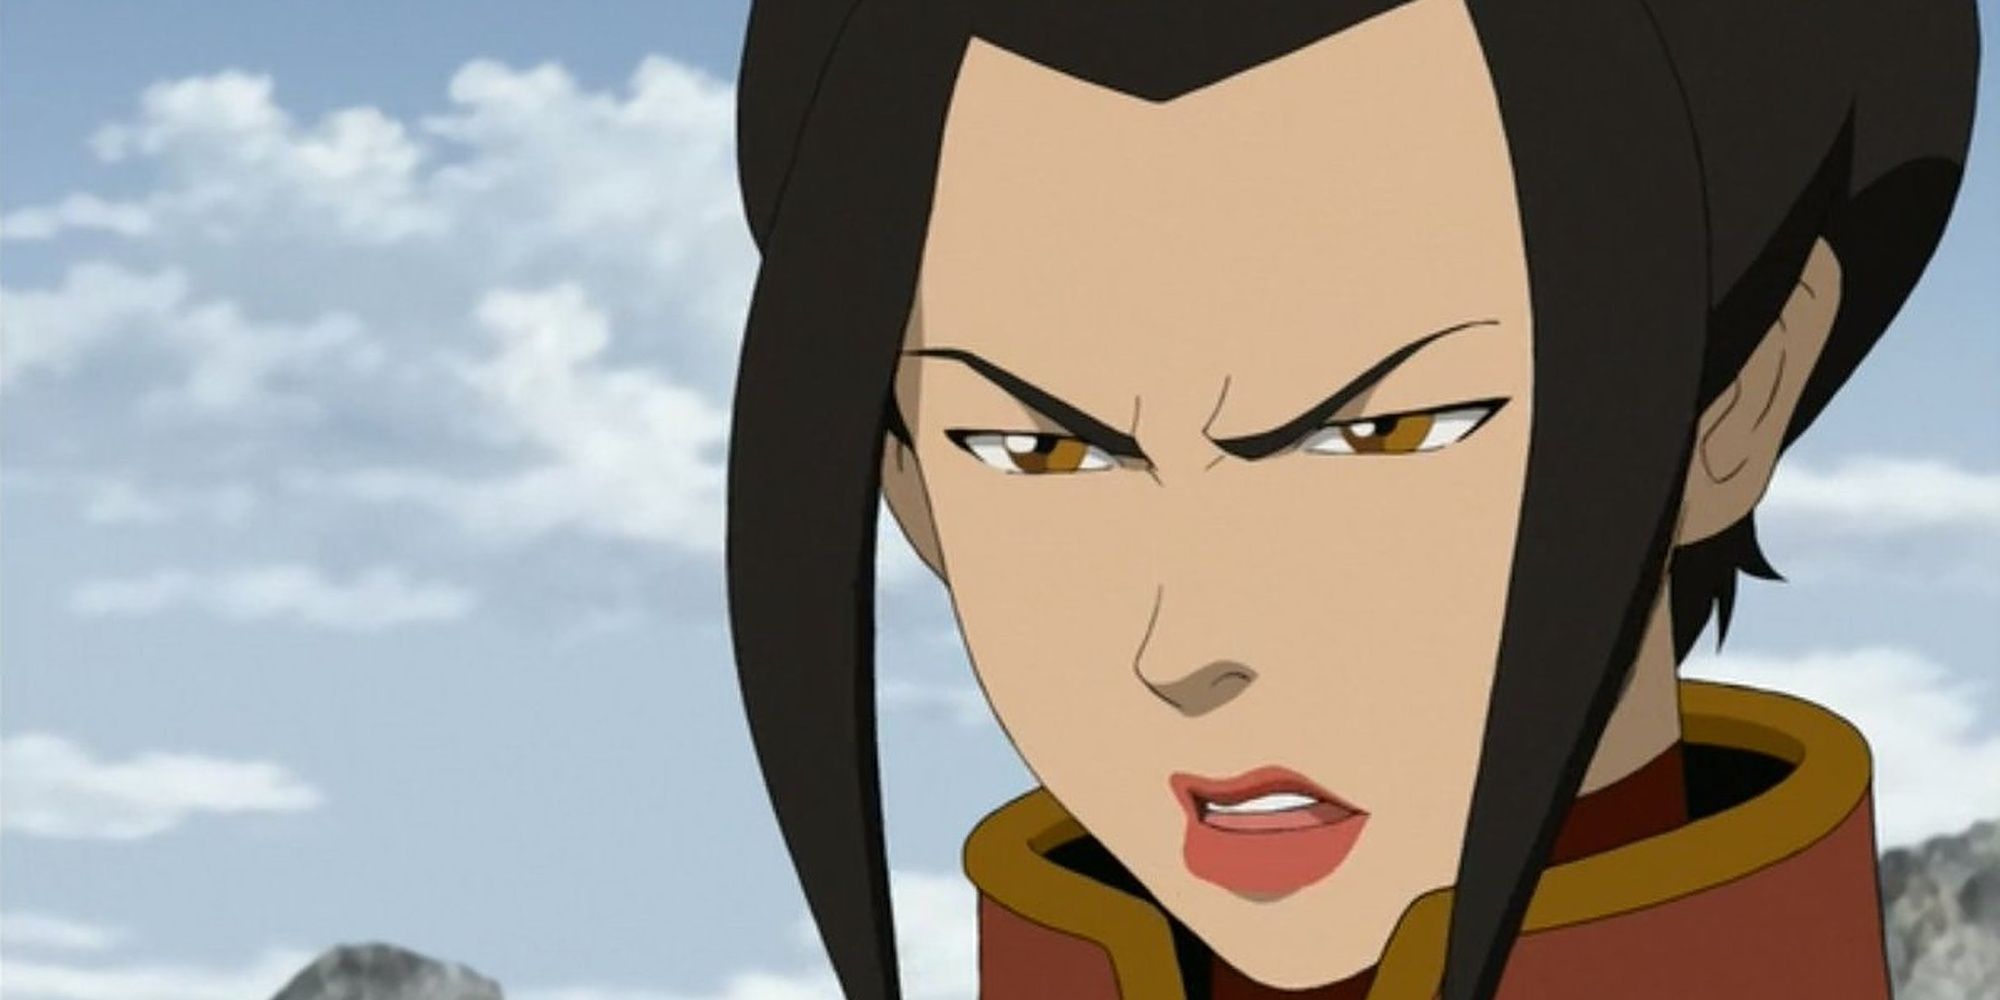 Princess Azula as she appears in Avatar: The Last Airbender